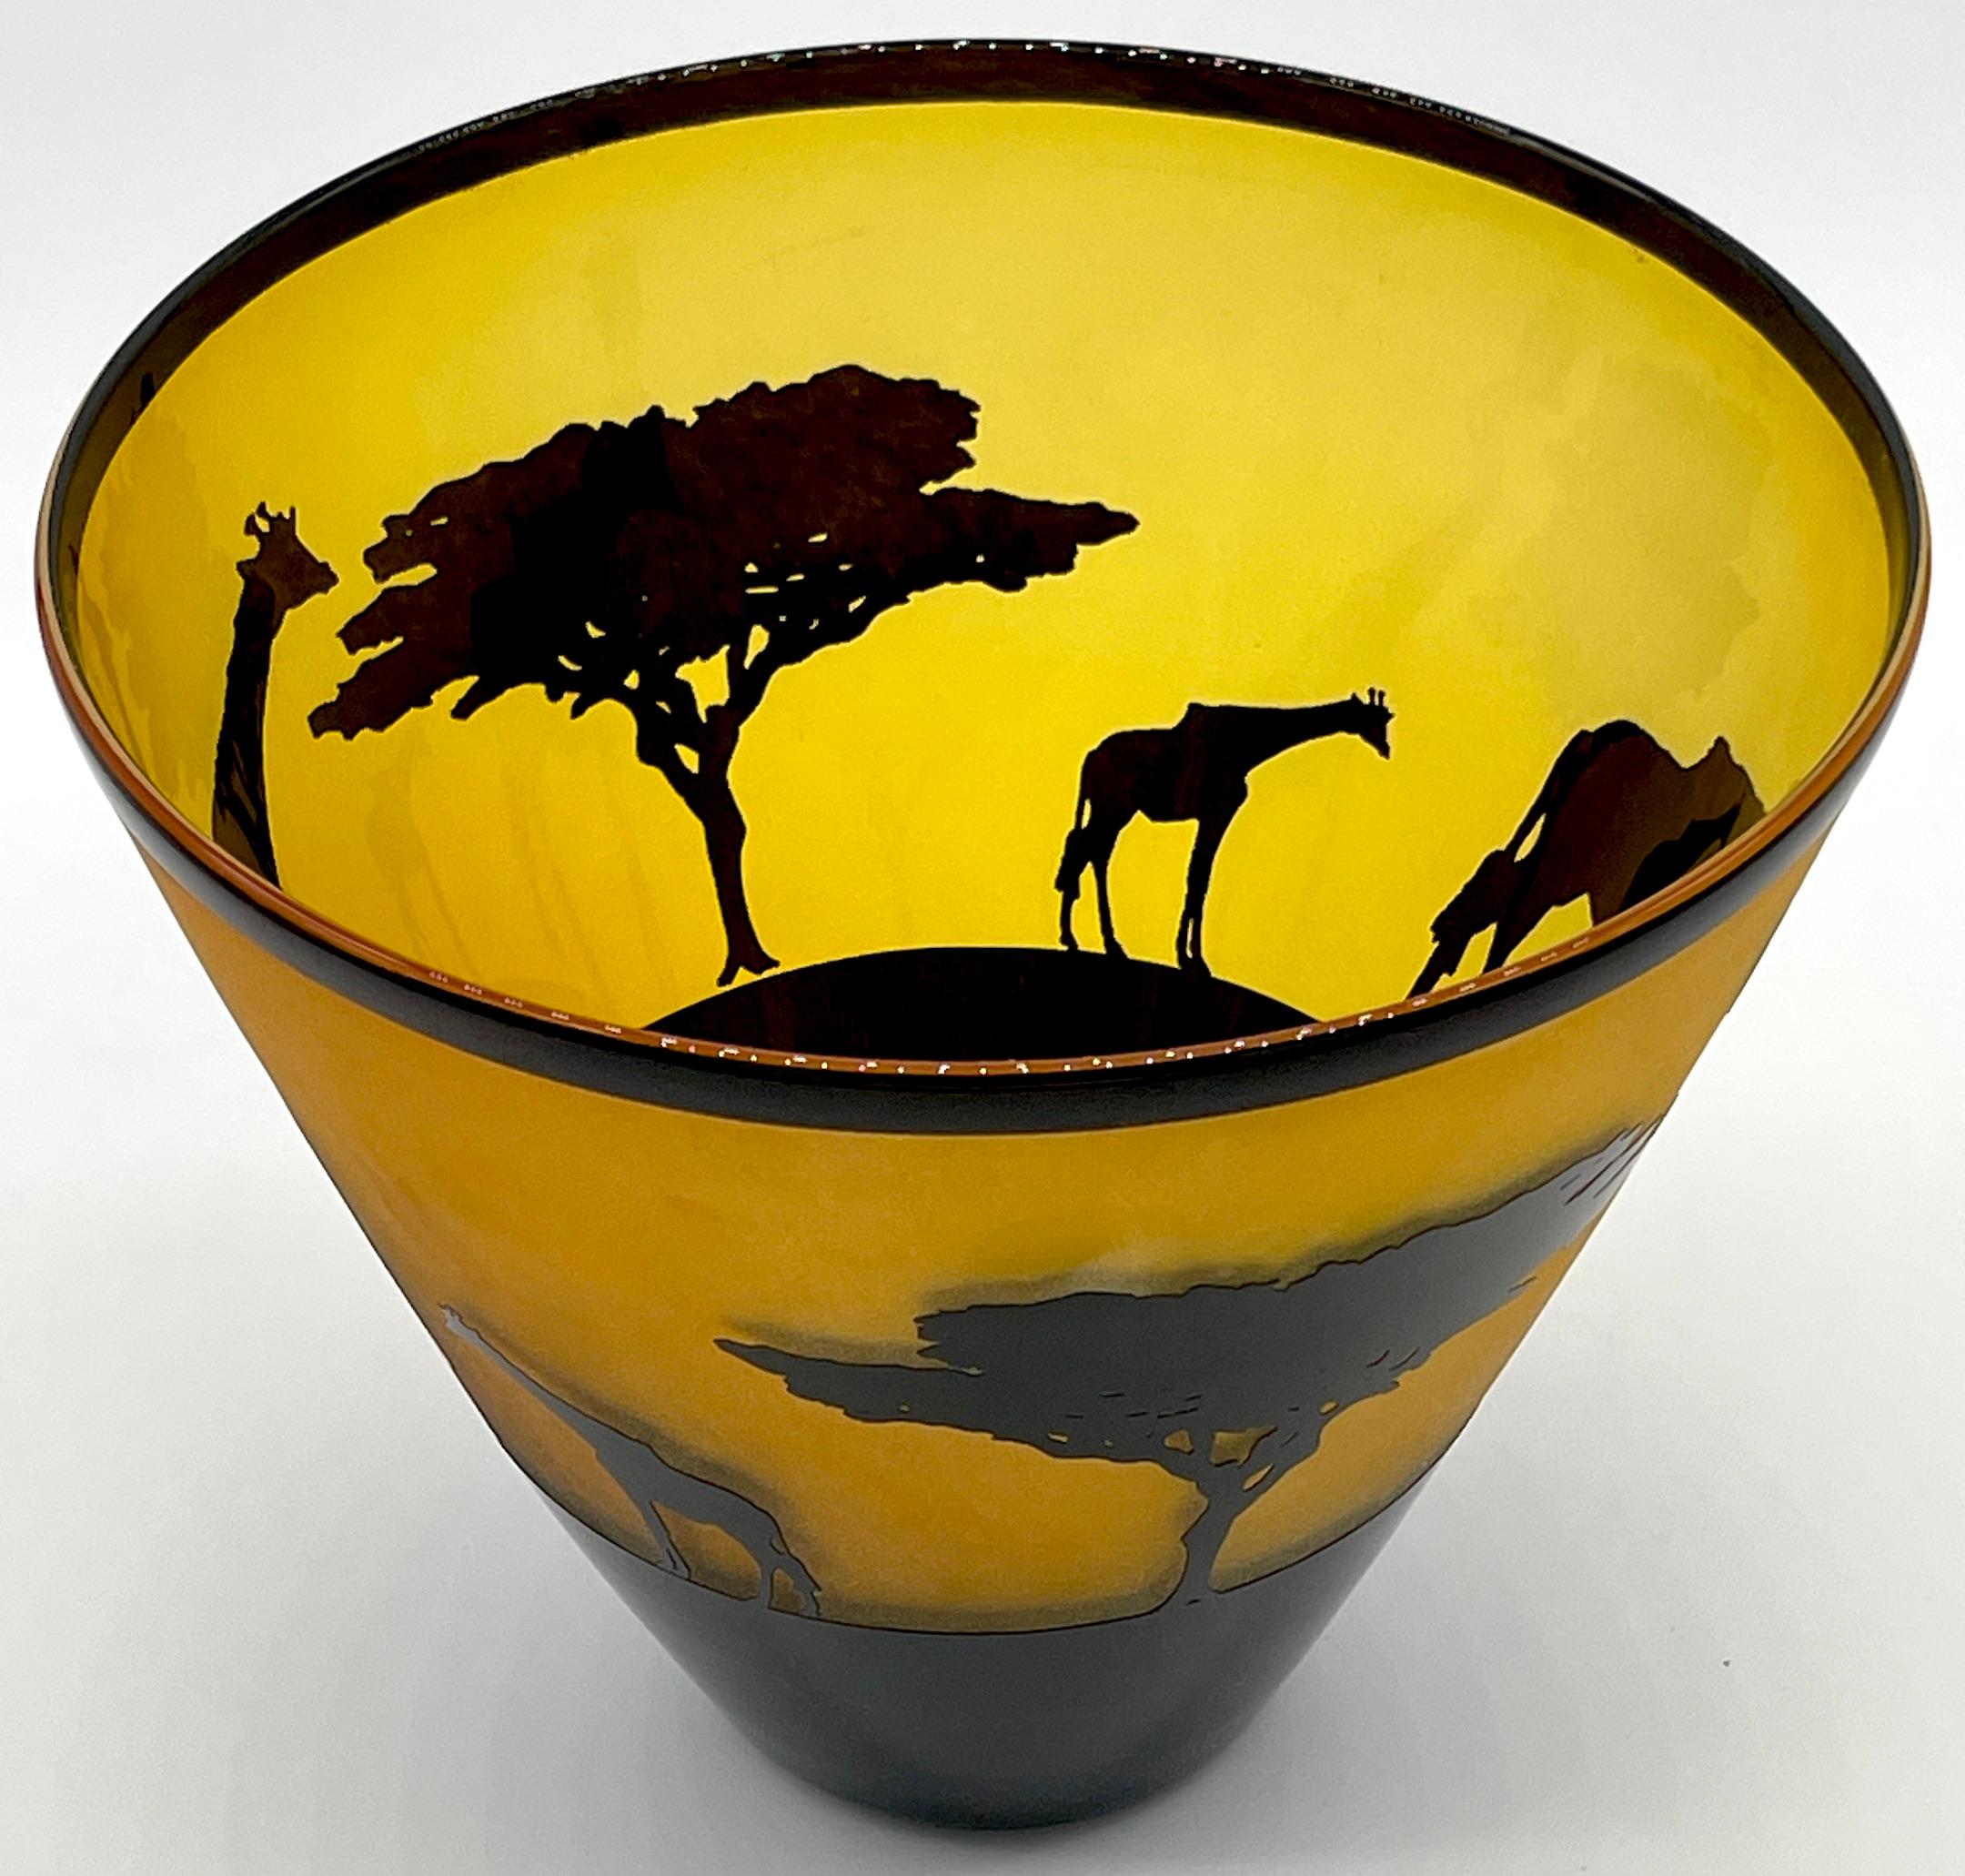 African Landscape Cameo Glass Vase by Steven Correia, 1986 Edition of #168/500 3